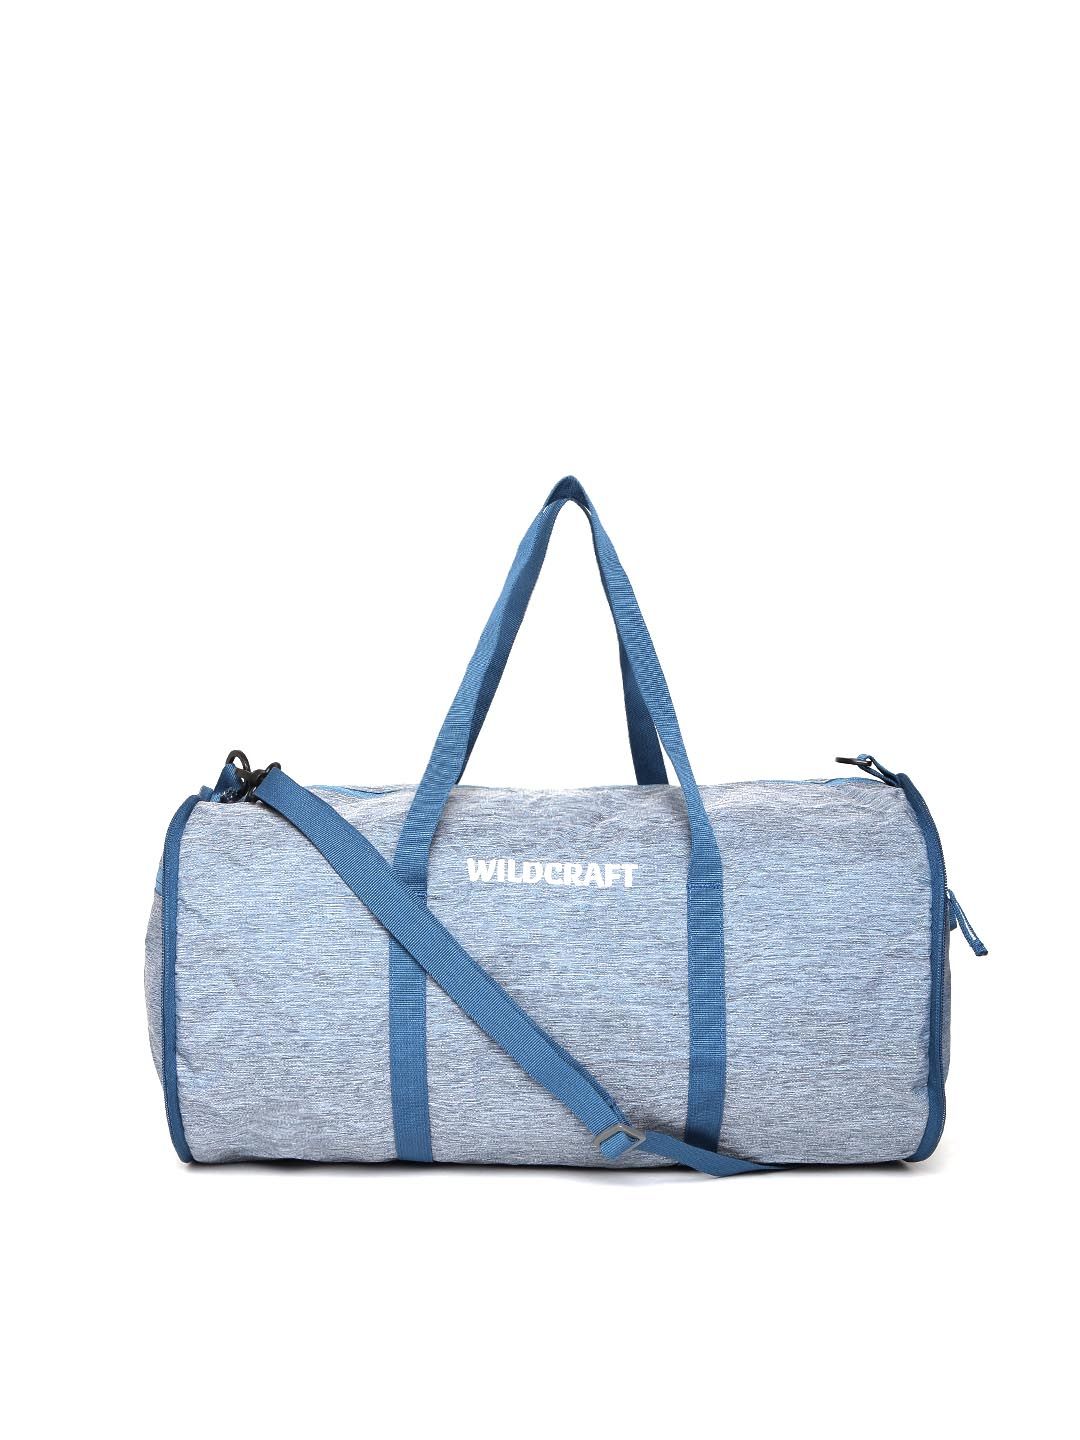 Wildcraft Unisex Blue Frisbee New Foldable Duffel Bag with Shoulder Strap Price in India